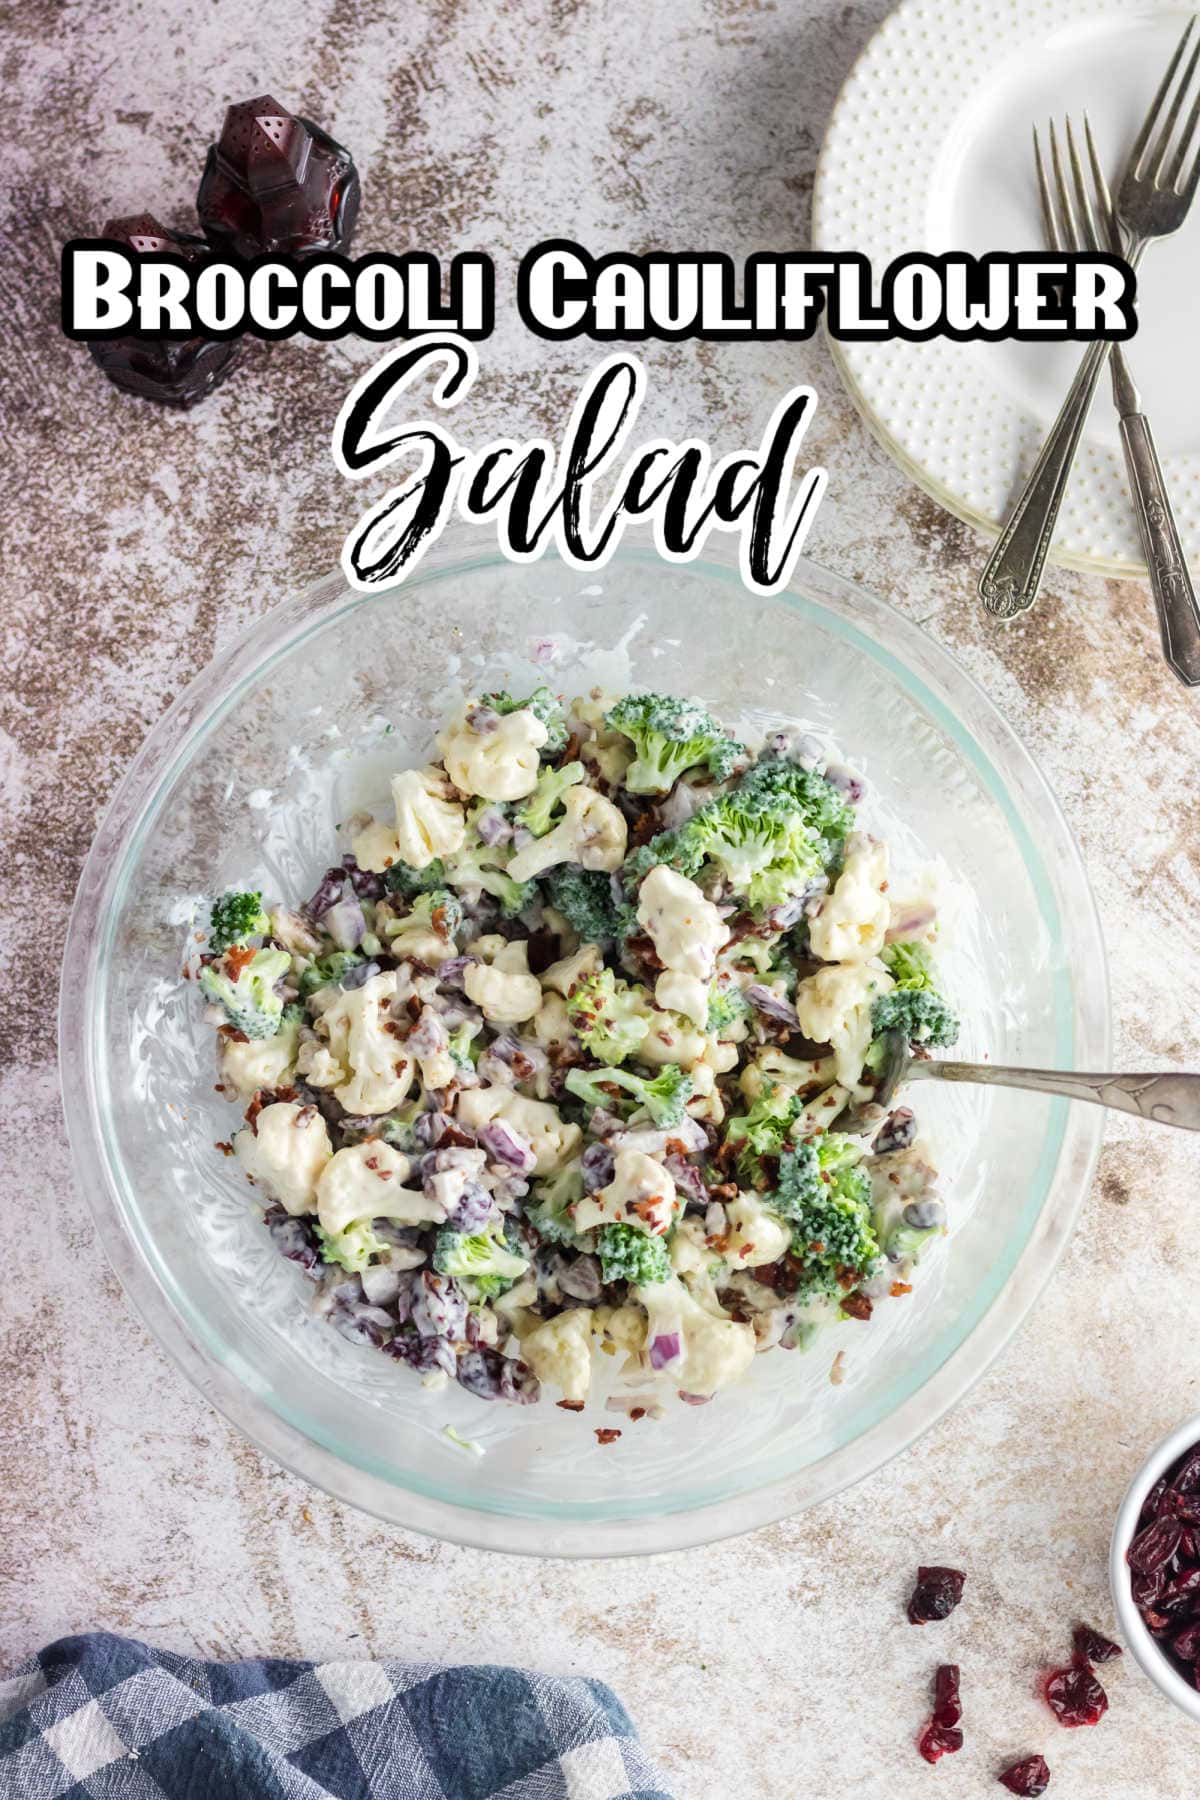 Overhead view of a bowl of broccoli cauliflower salad with a text overlay.